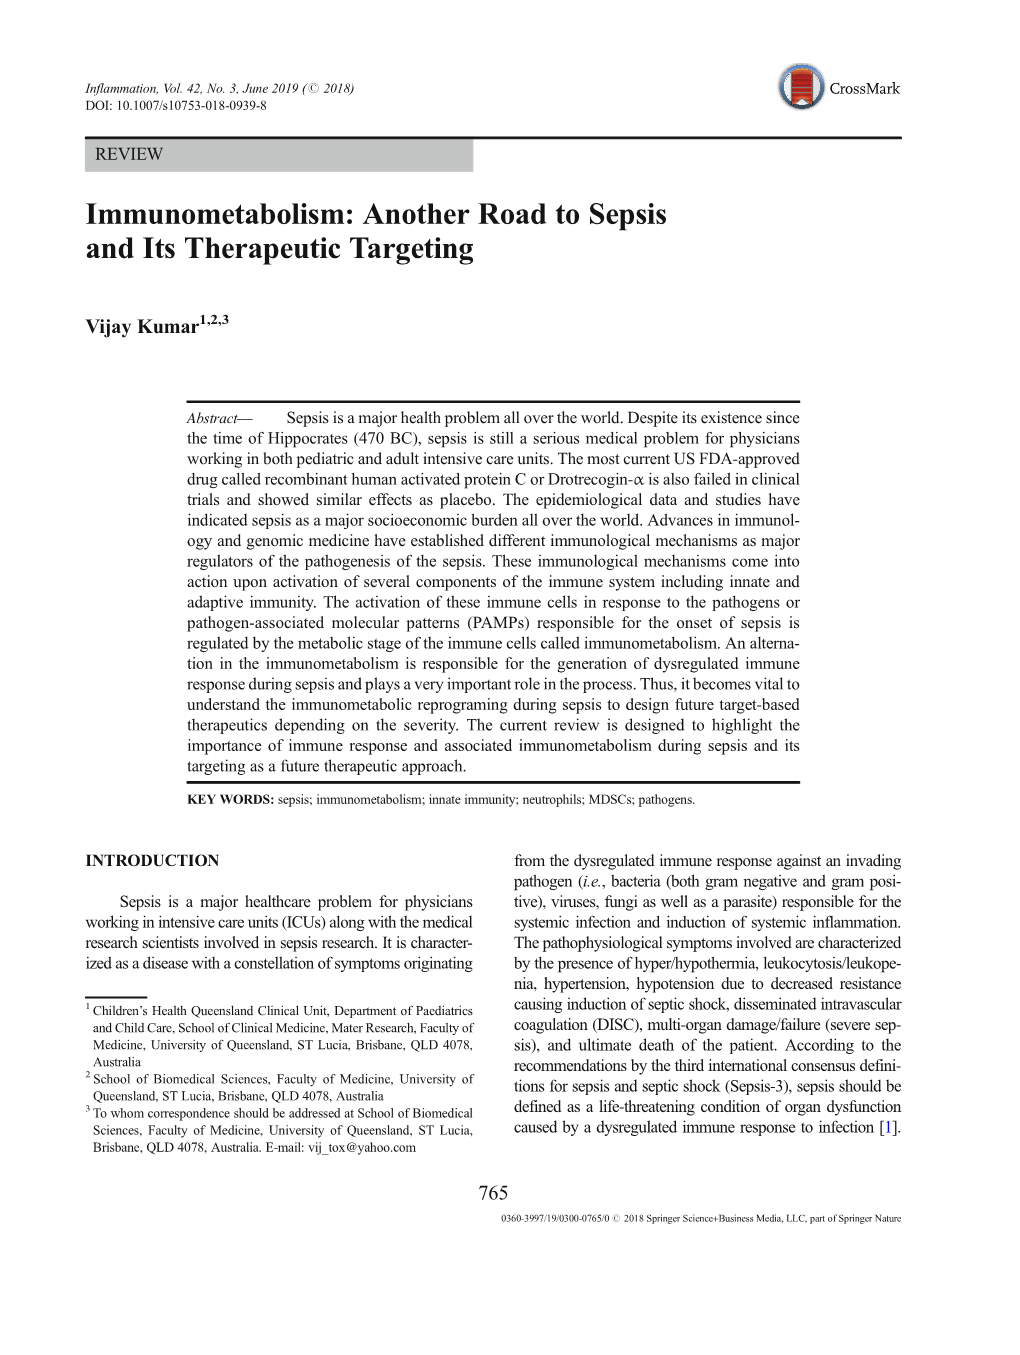 Immunometabolism: Another Road to Sepsis and Its Therapeutic Targeting